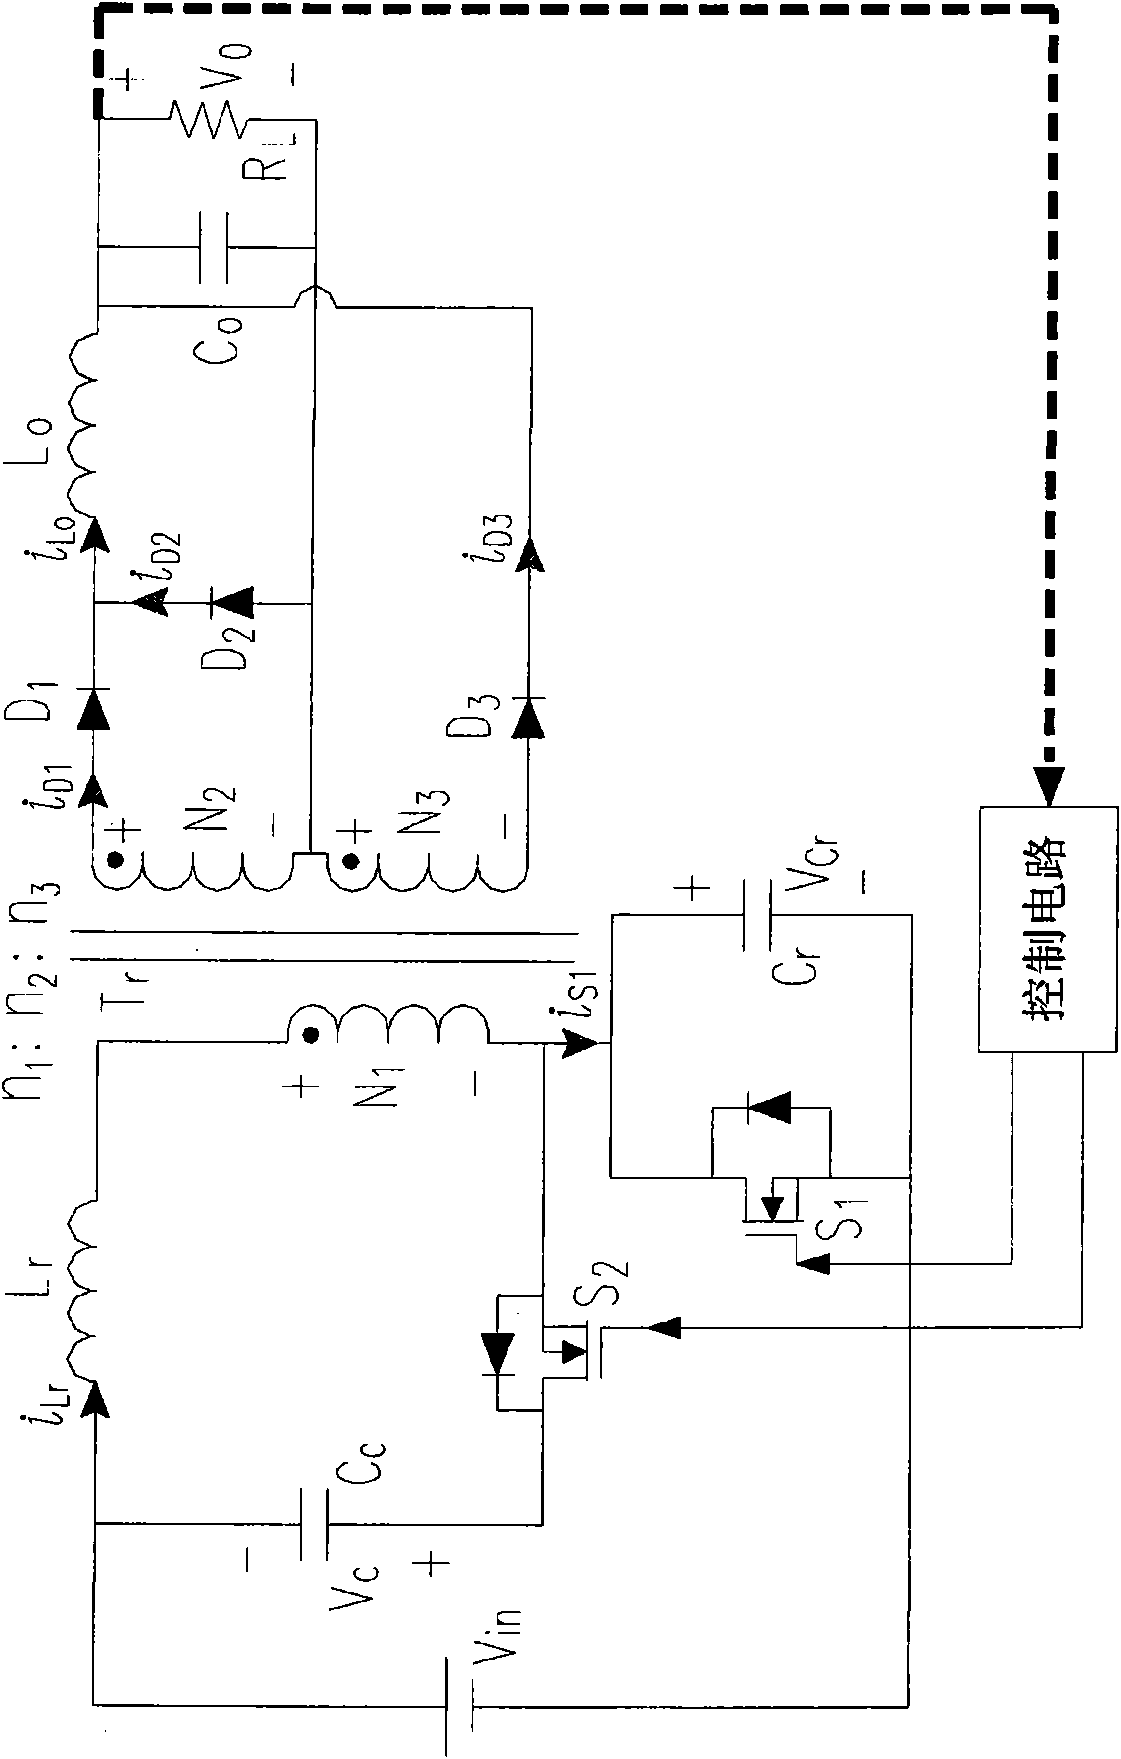 Forward-flyback converter with active clamping circuit